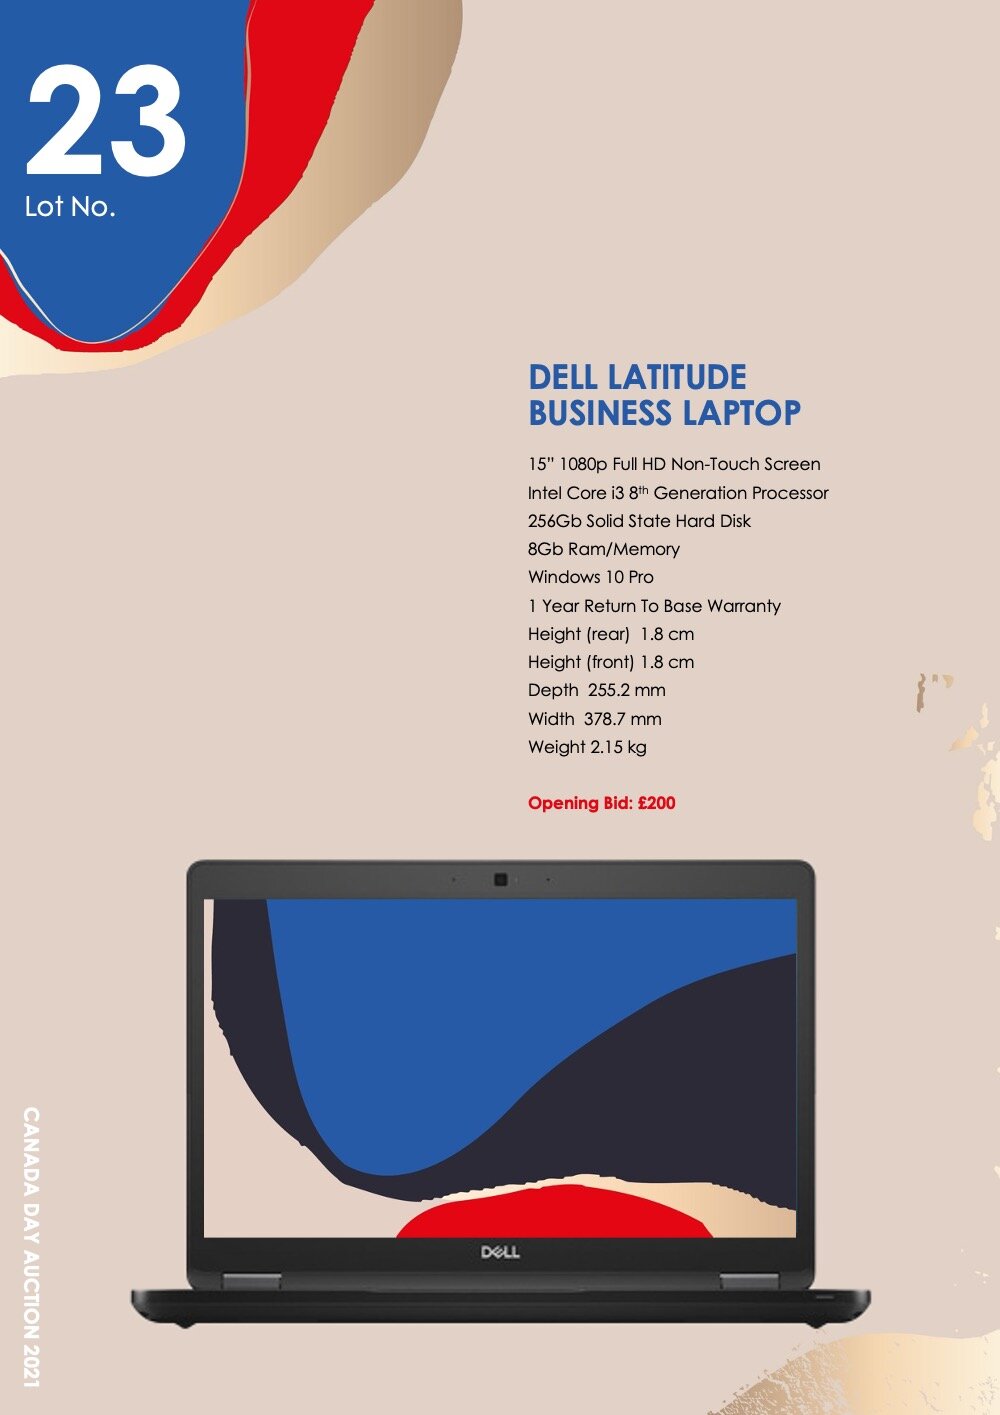   Lot 23: DELL LATITUDE BUSINESS LAPTOP    15” 1080p Full HD Non-Touch Screen Intel Core i3 8th Generation Processor 256Gb Solid State Hard Disk  8Gb Ram/Memory   Windows 10 Pro  1 Year Return To Base Warranty Height (rear) 1.8 cm  Height (front) 1.8